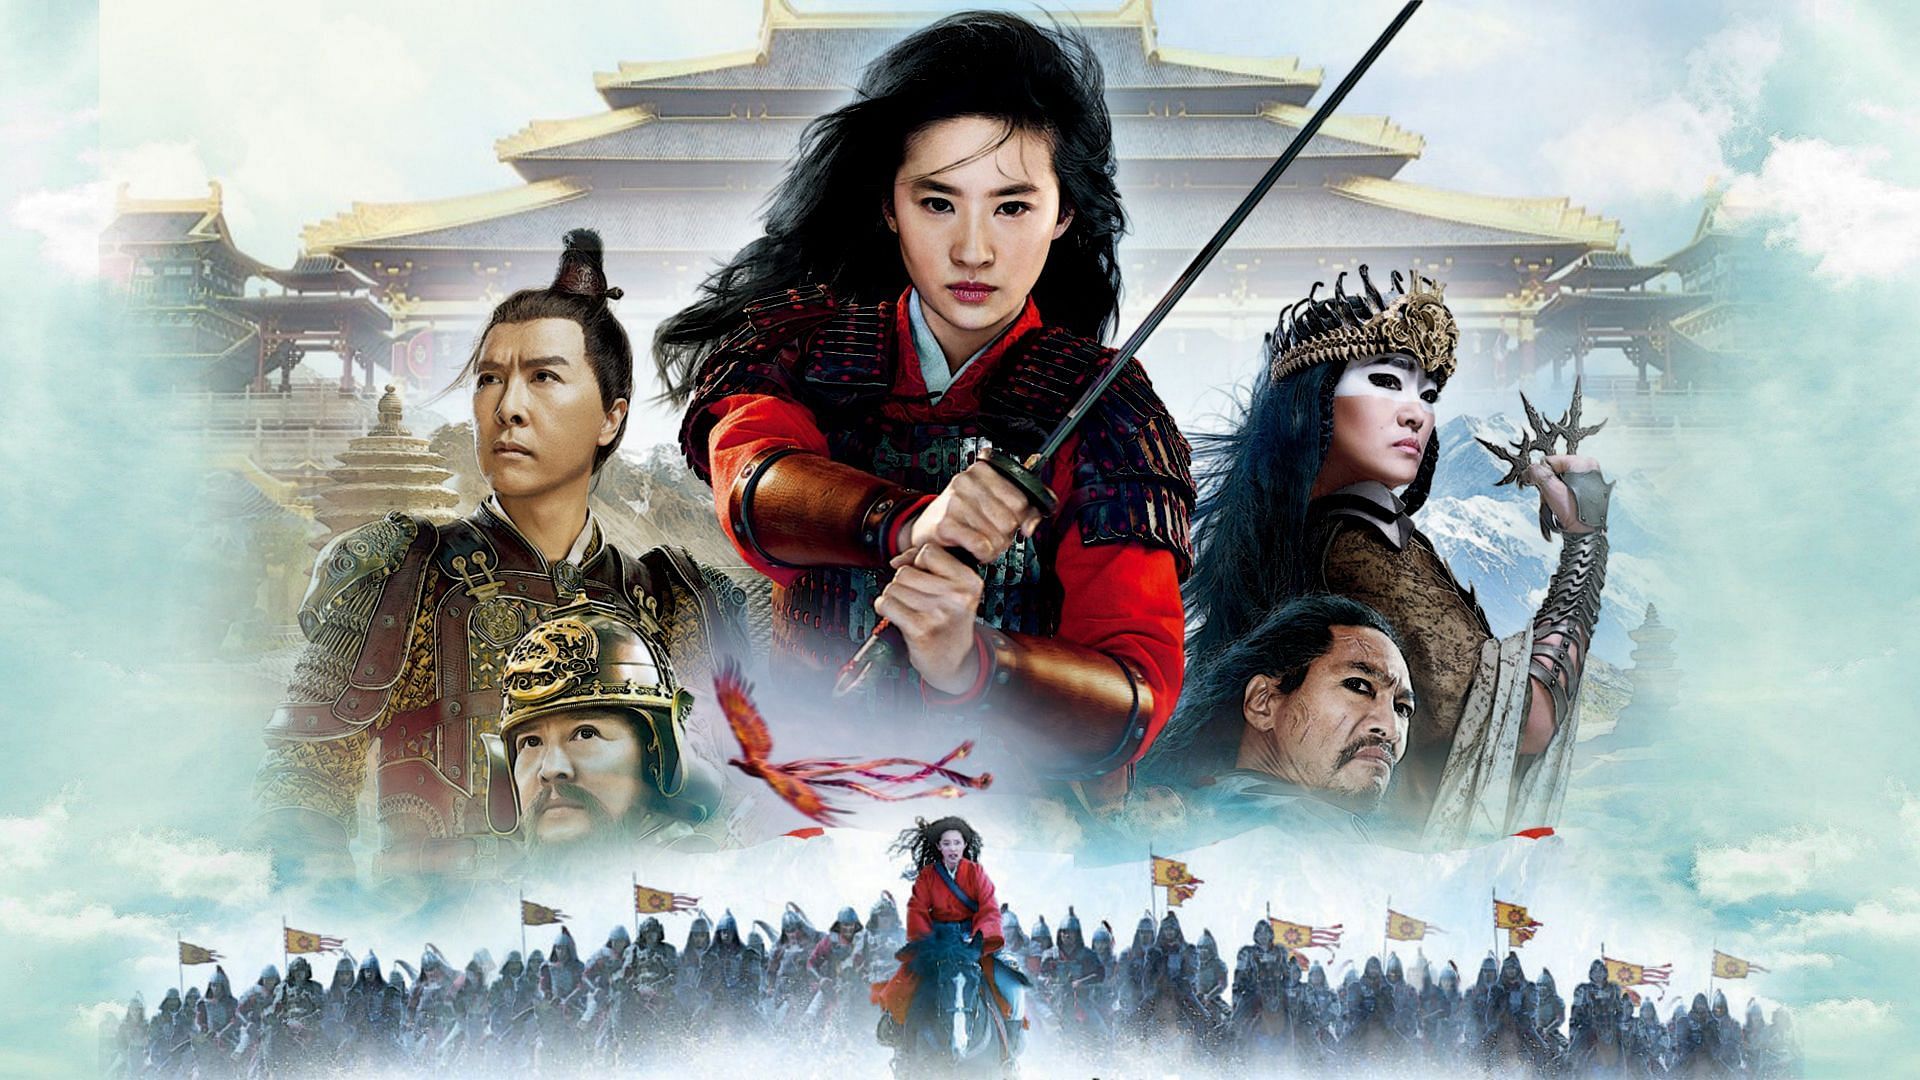 The live-action ‘Mulan’ featuring its main actors in promotional poster 
Image Credits: The Walt Disney Company
